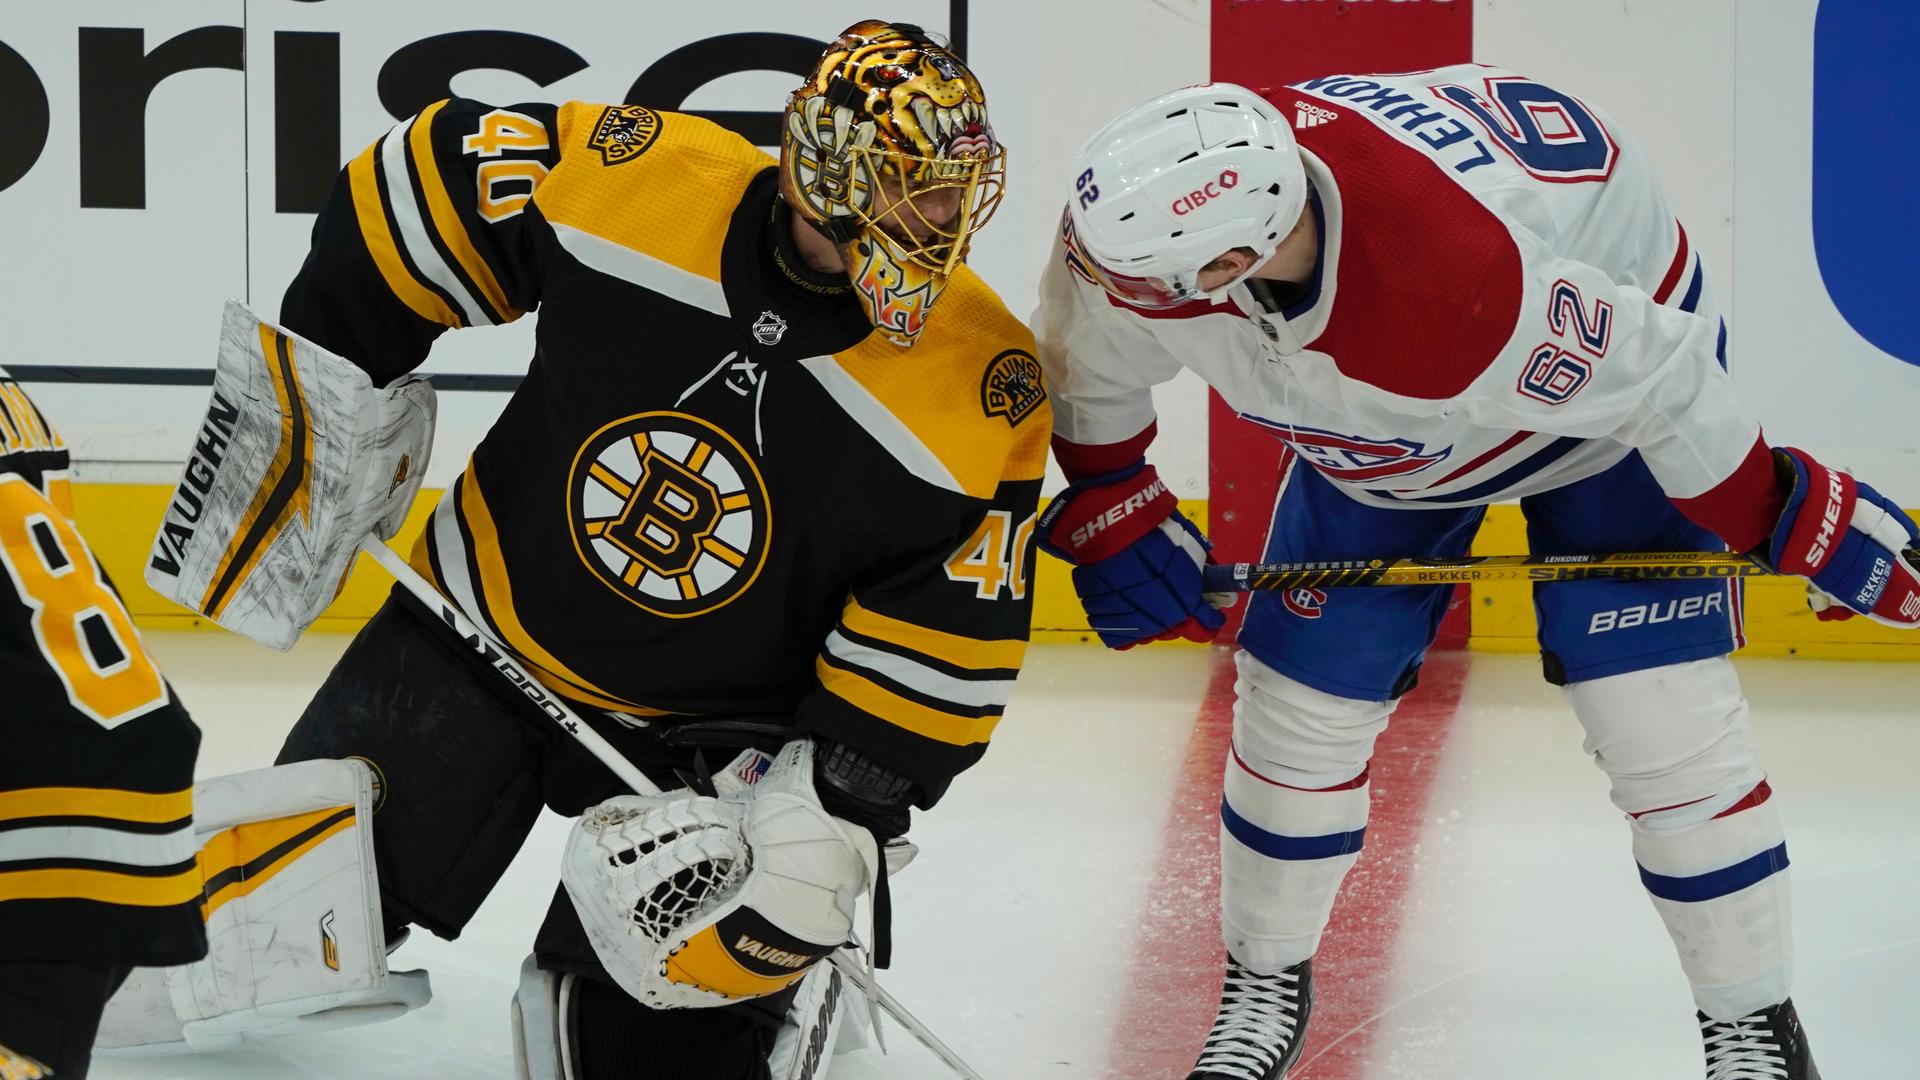 Two players from Boston bruins and Montreal Canadiens hockey teams talk to each other on the ice